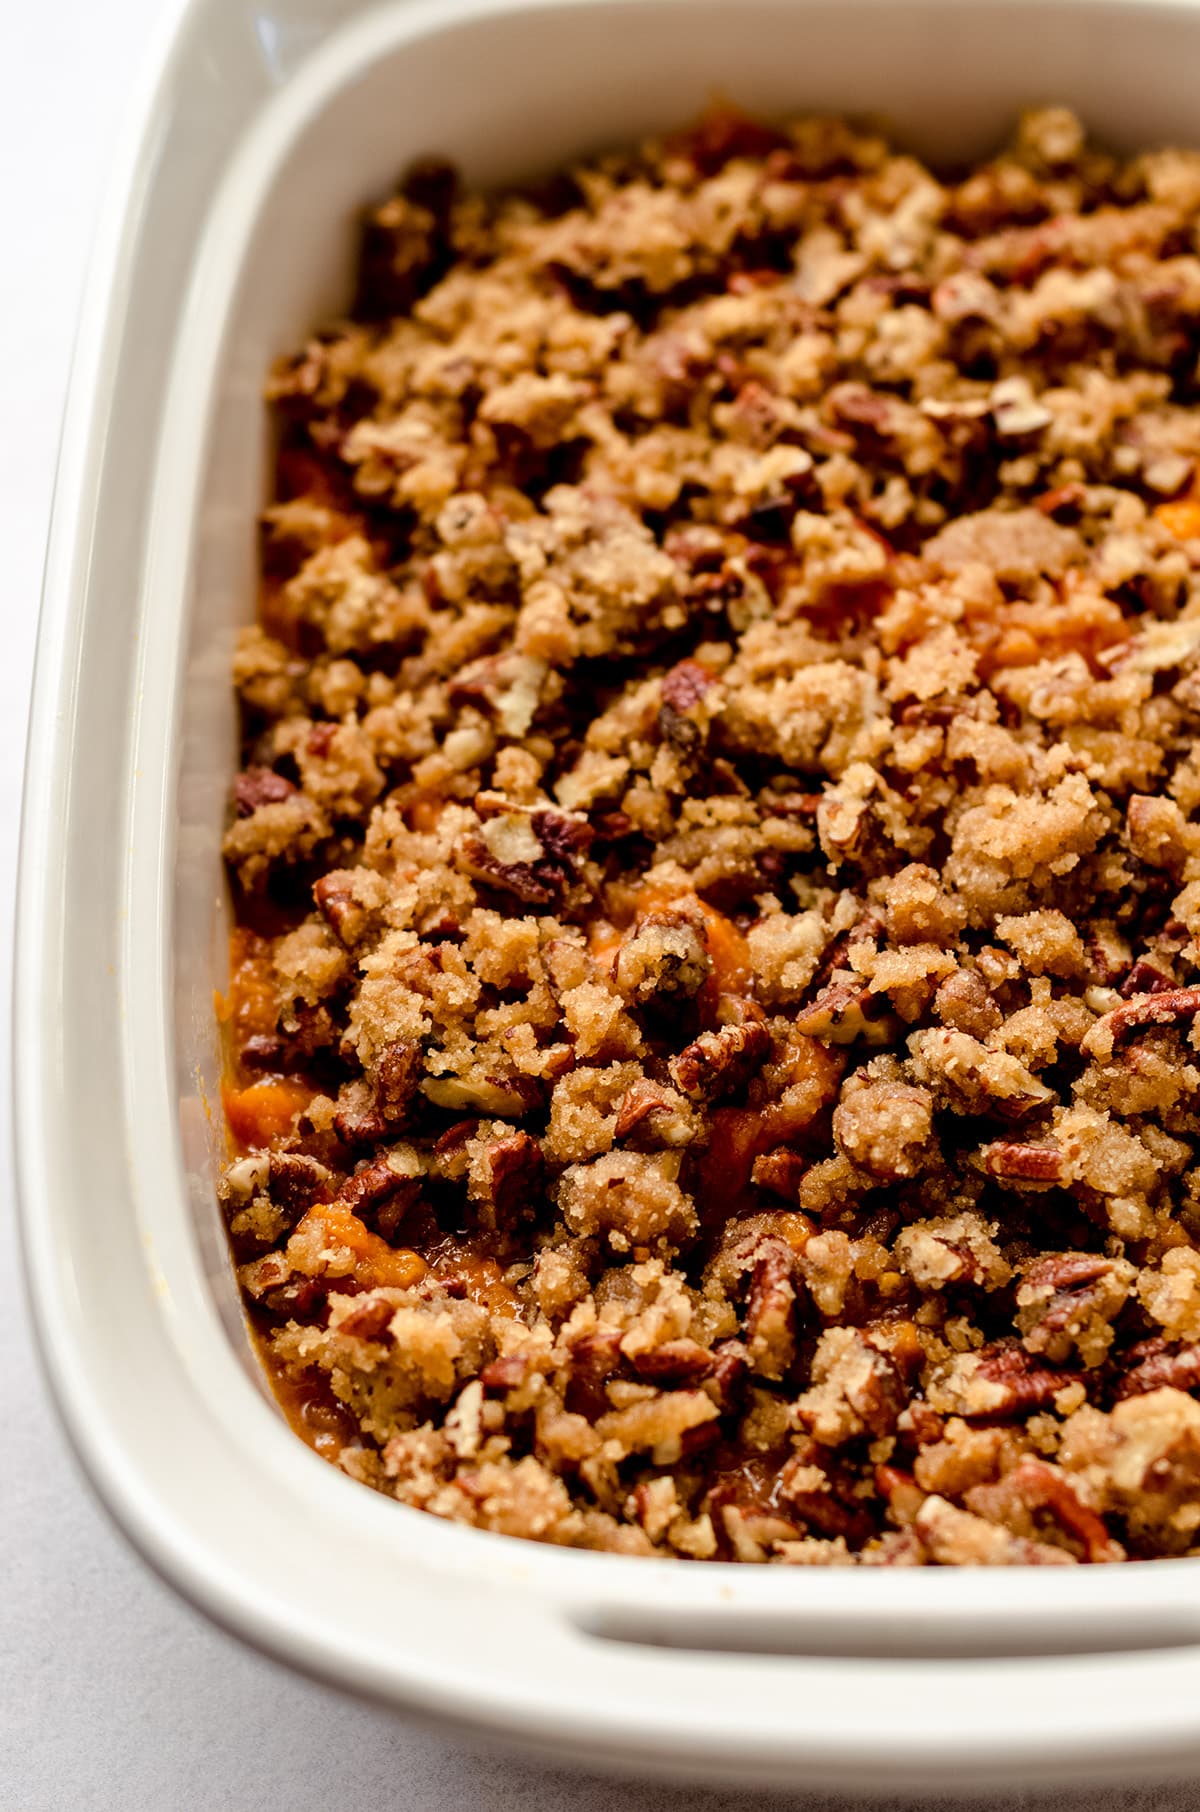 A baking dish full of sweet potato casserole, topped with pecans.